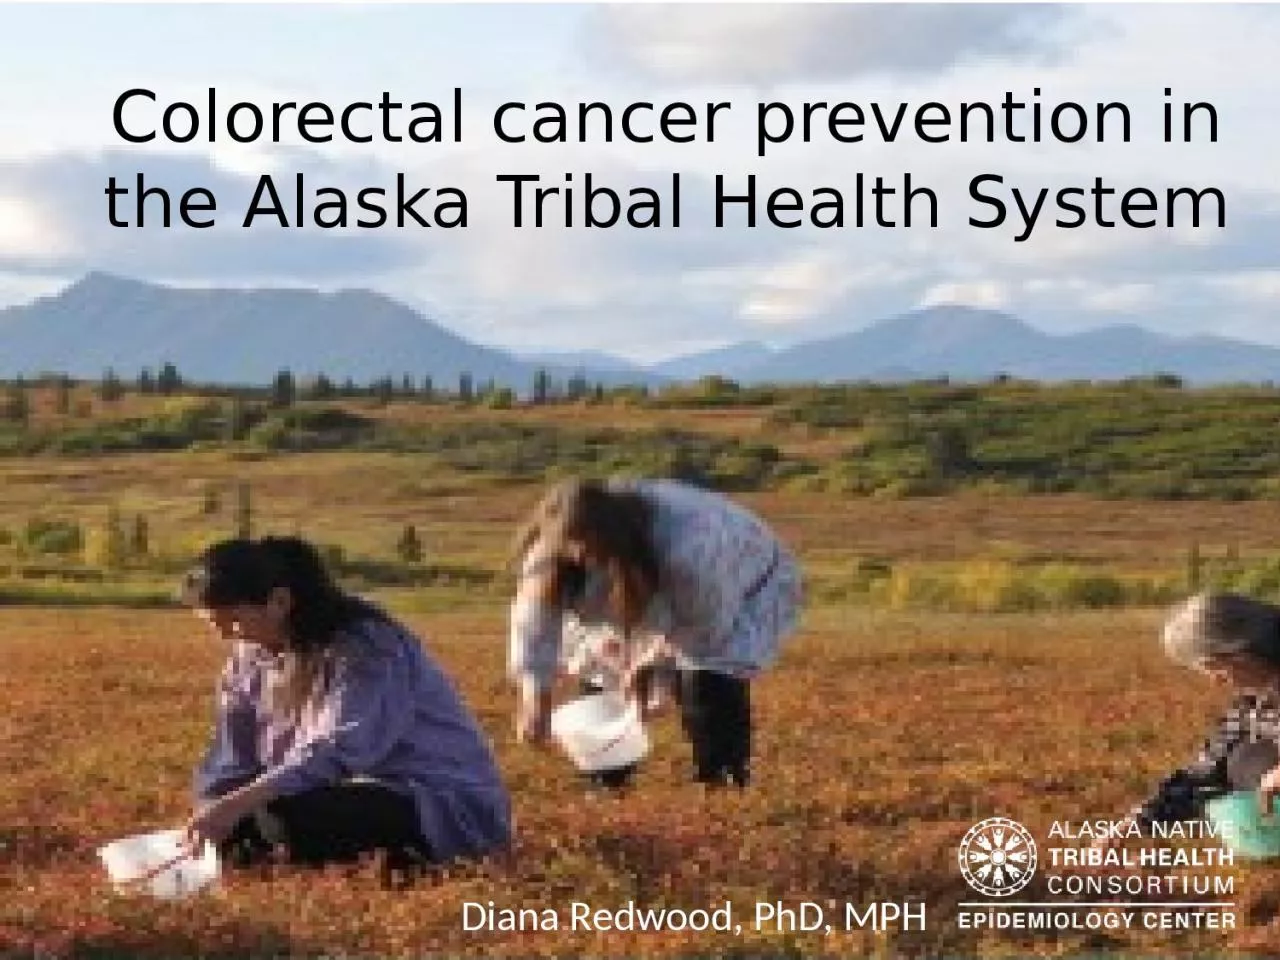 Colorectal cancer prevention in the Alaska